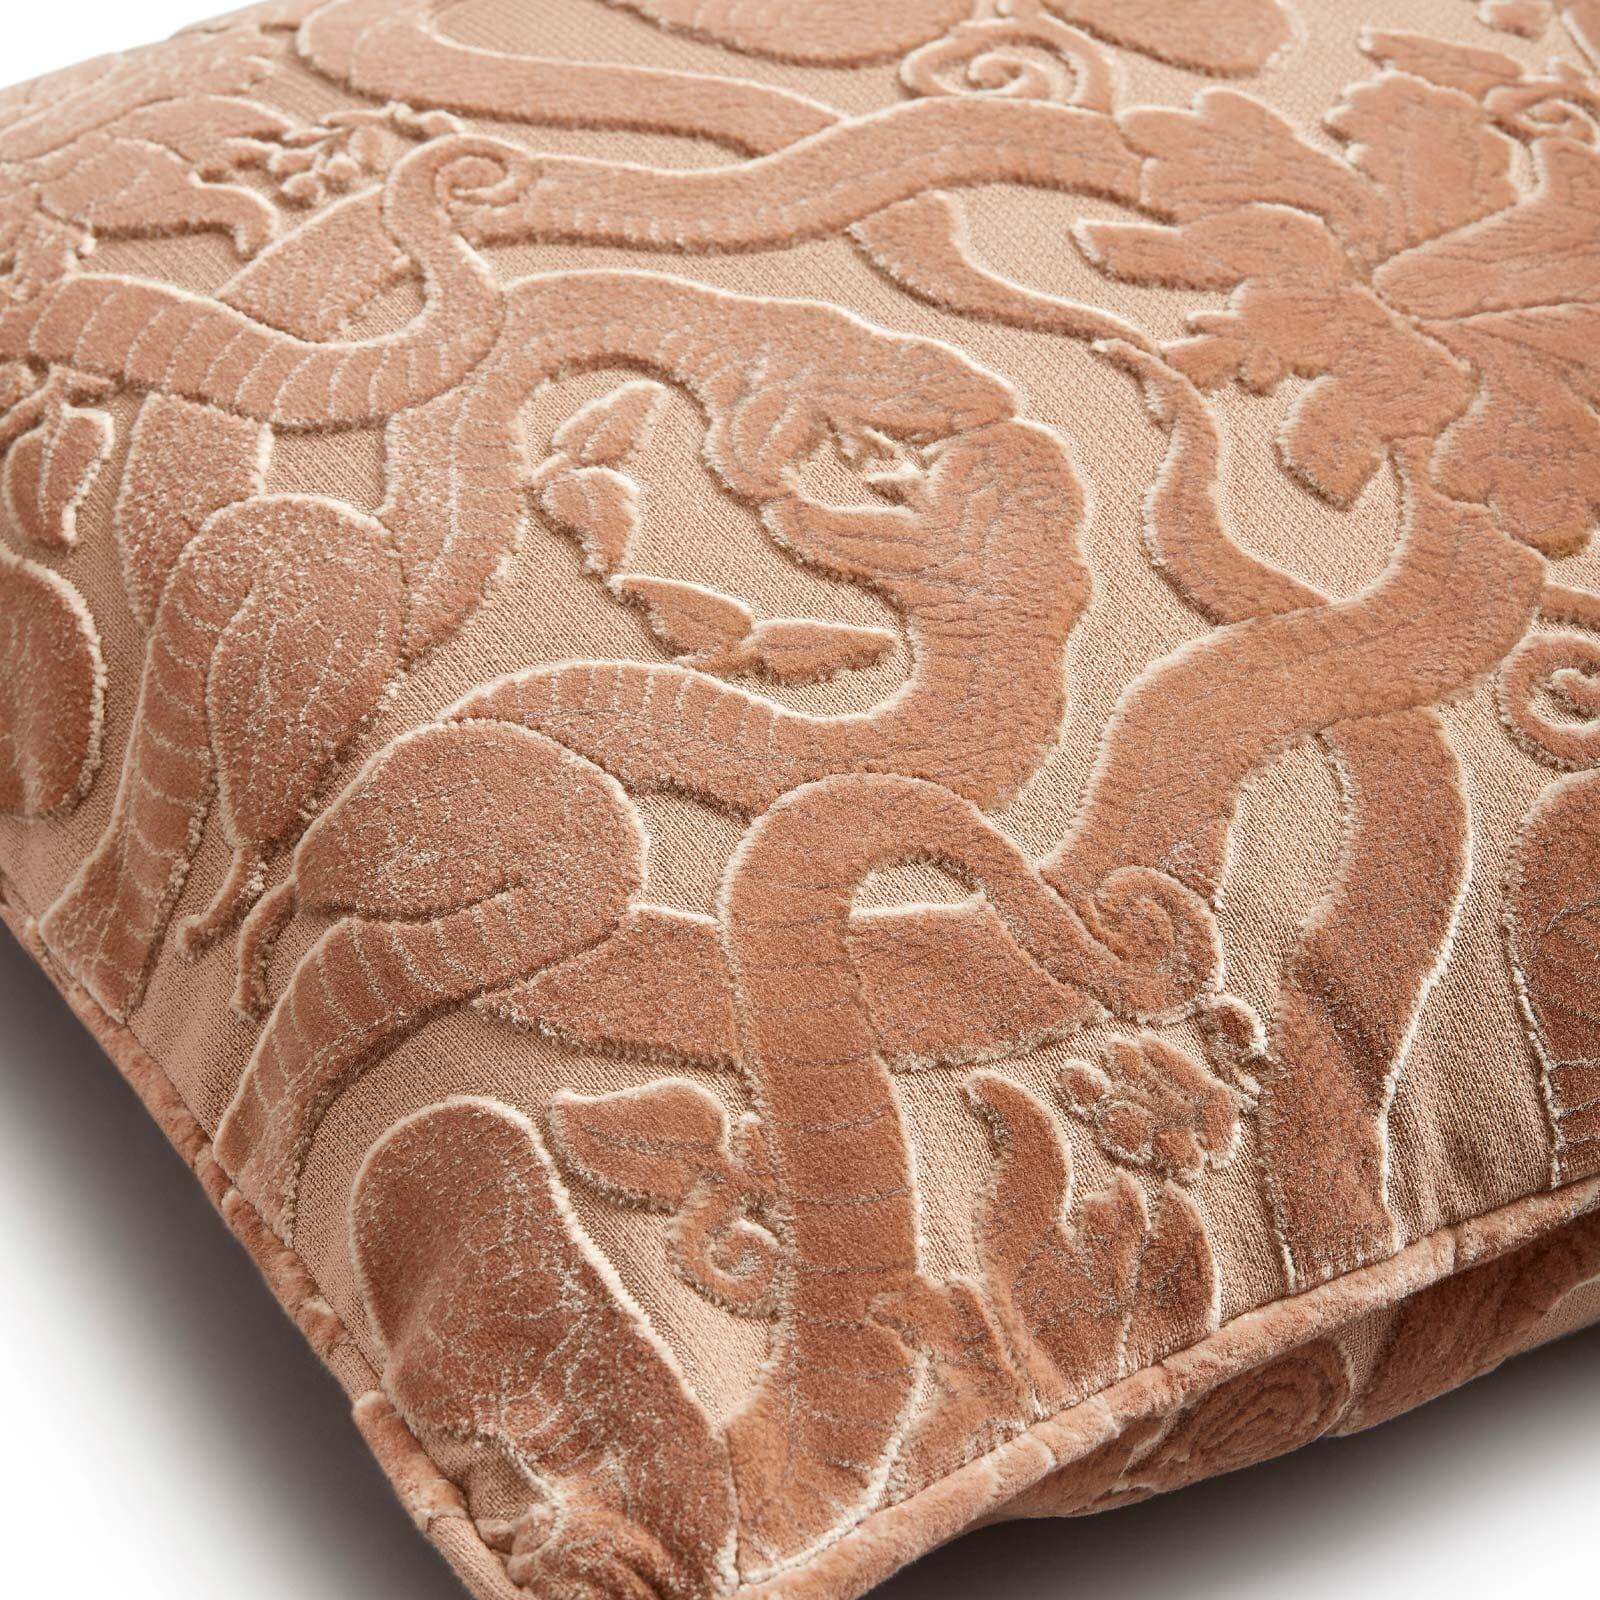 While the dusky-pink tone is delicate and romantic, the ANACONDA motif of intertwining serpents (our House symbol of immortality) lies on the side of seduction and subversion. Crafted in England, this piped cushion is made from tactile cut-velvet,